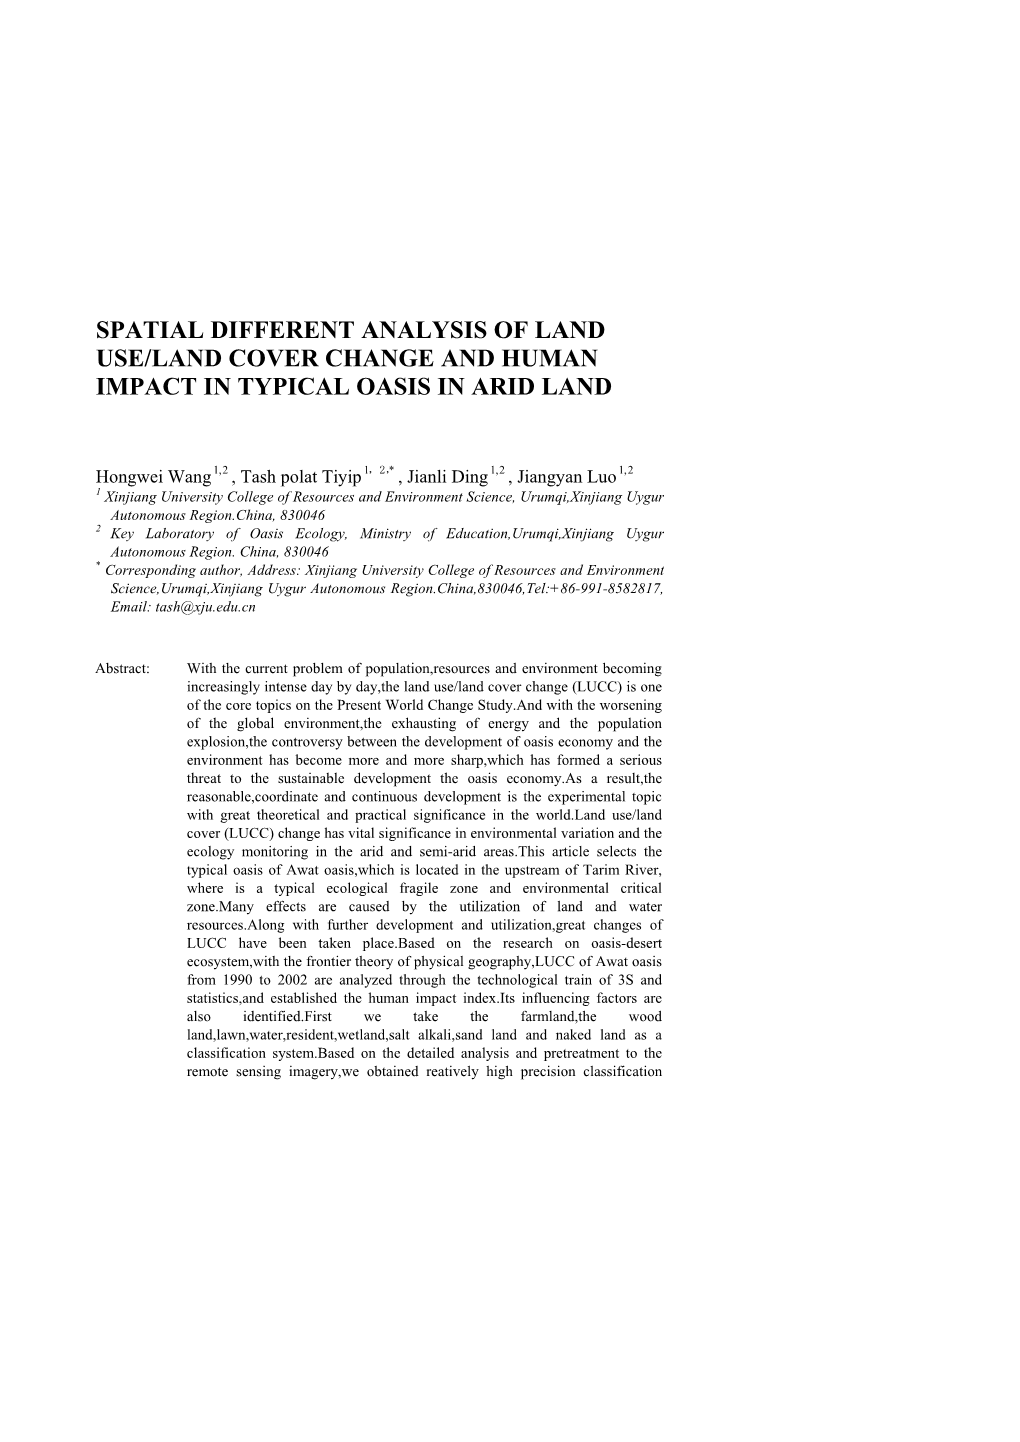 Spatial Different Analysis of Land Use/Landcover Change And